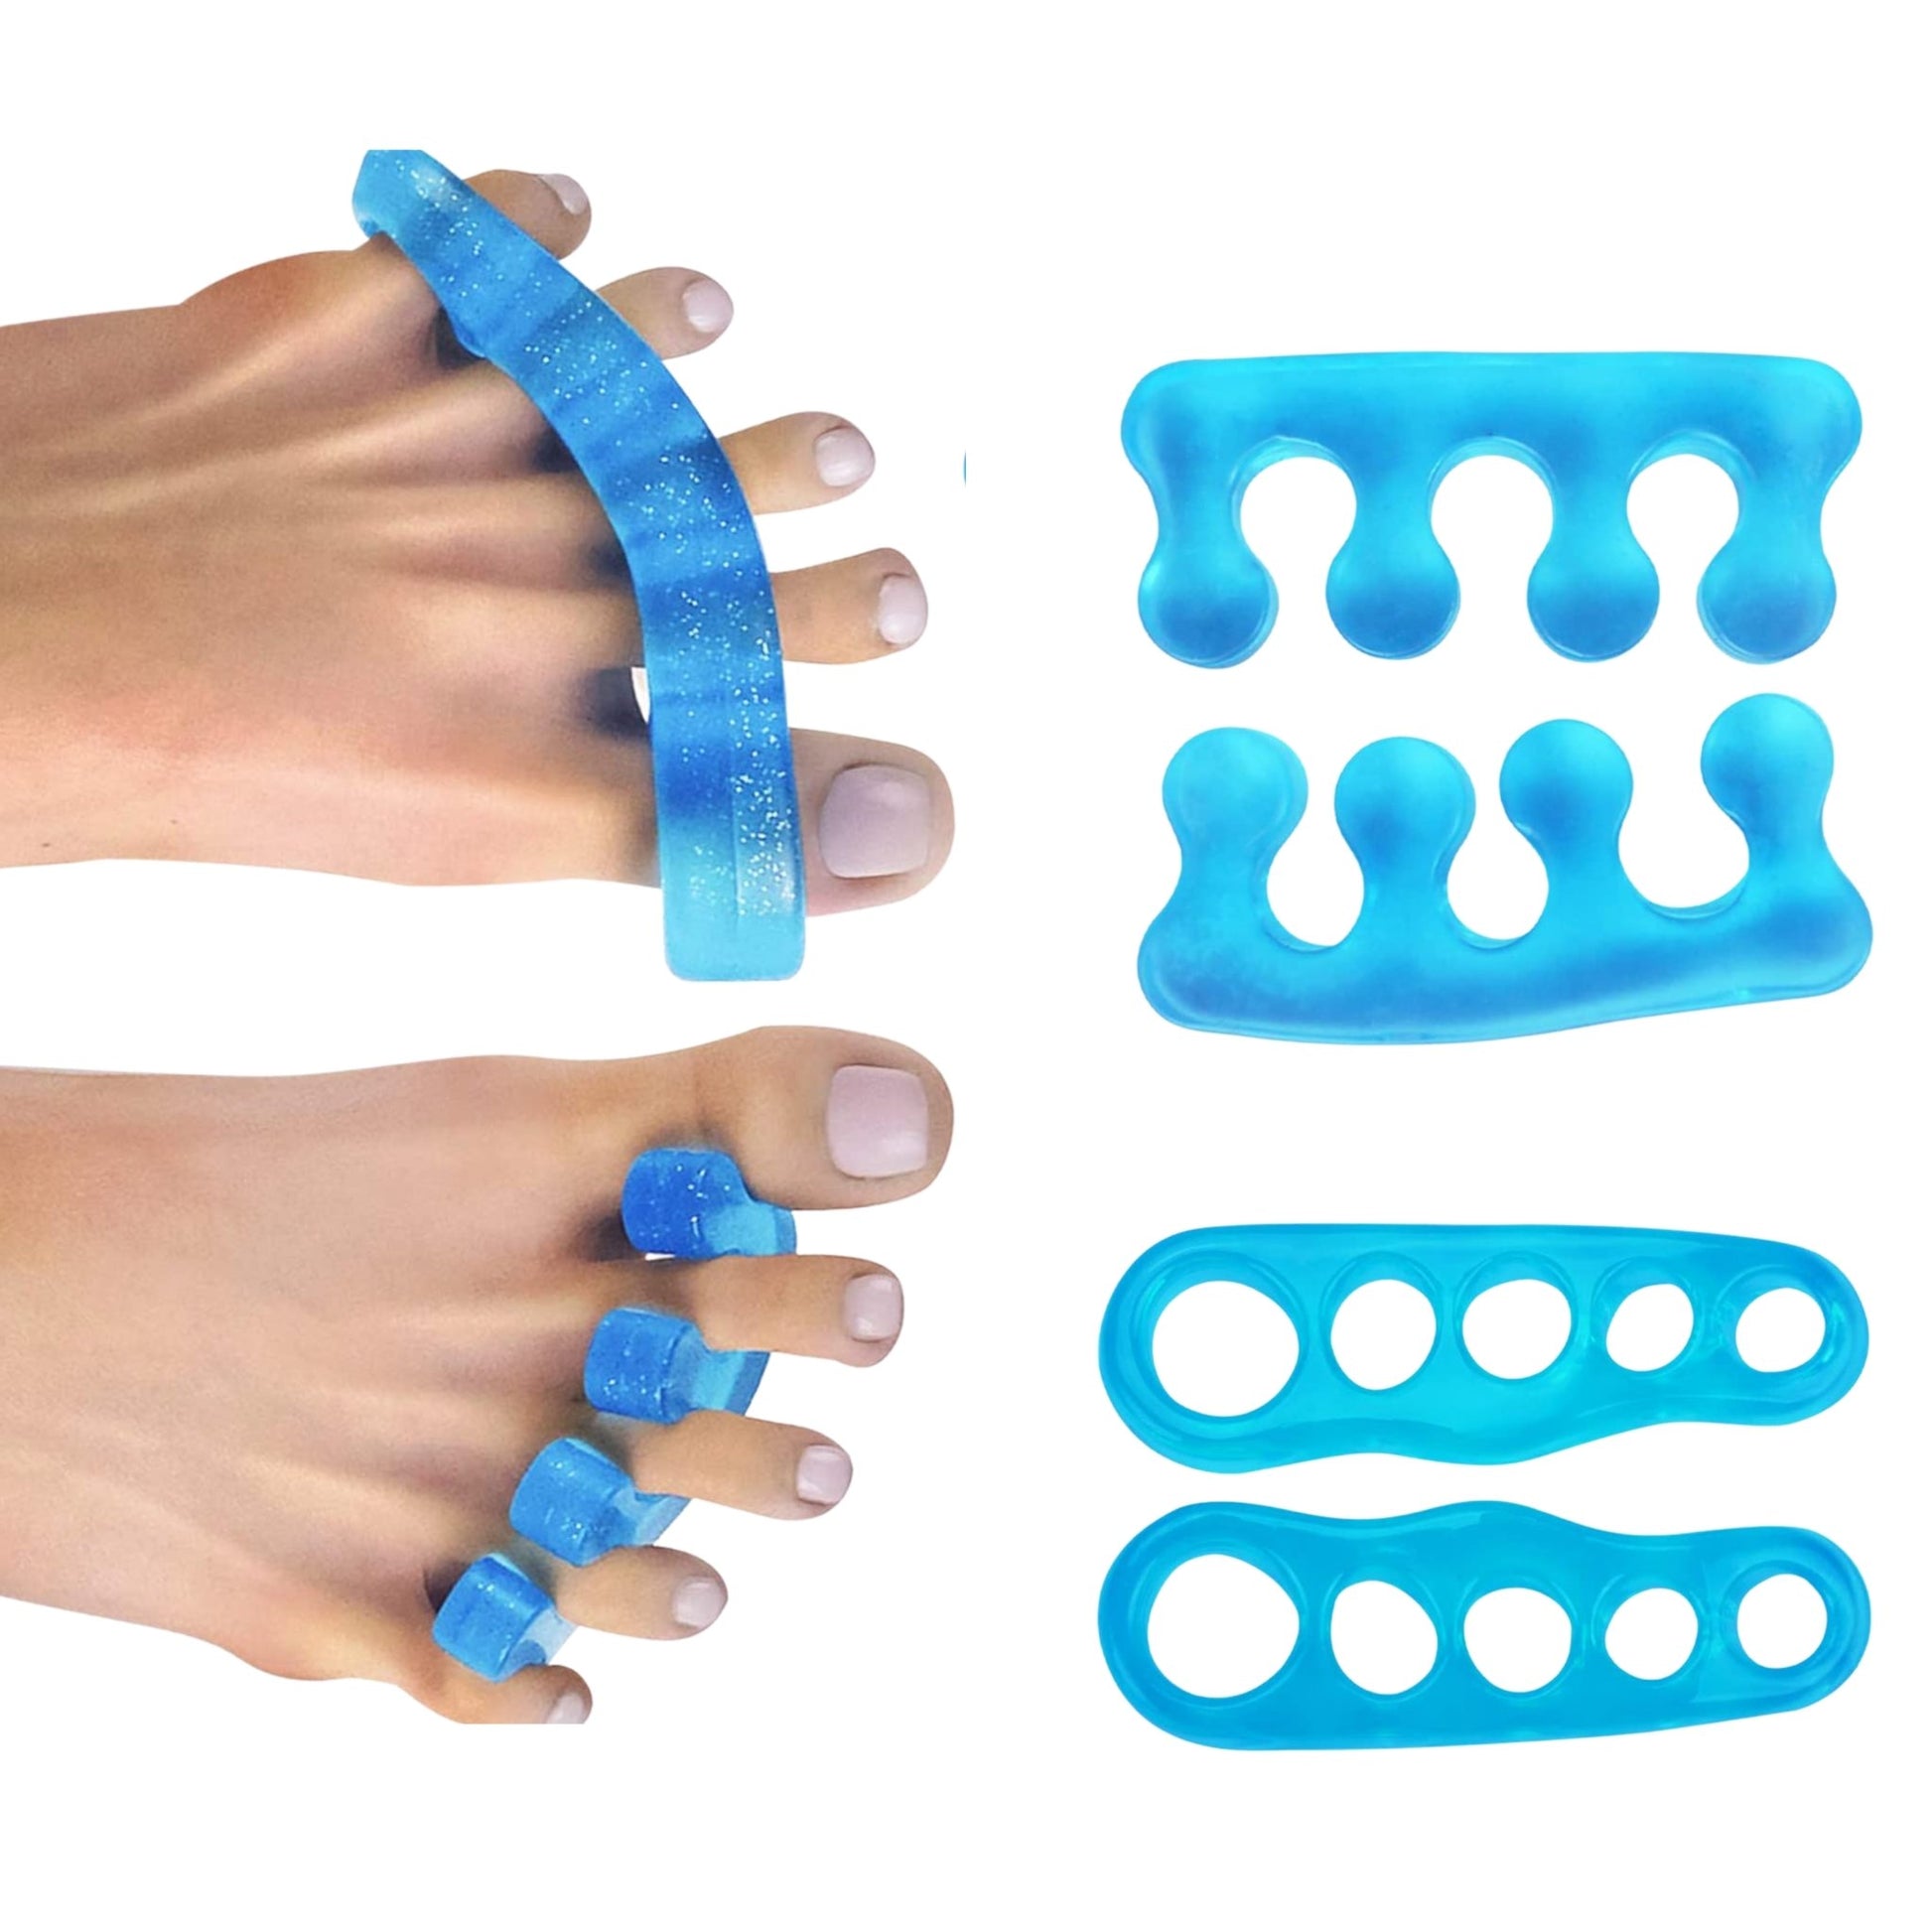 The Sole Care Premium Toe Stretchers For Overlapping Toes/Bunions/Plantar Fascitis/Hammer Toes|Toe Stretchers & Loop Dividers For Unisex | Toe Spacers- Royalkart - The Urban Store